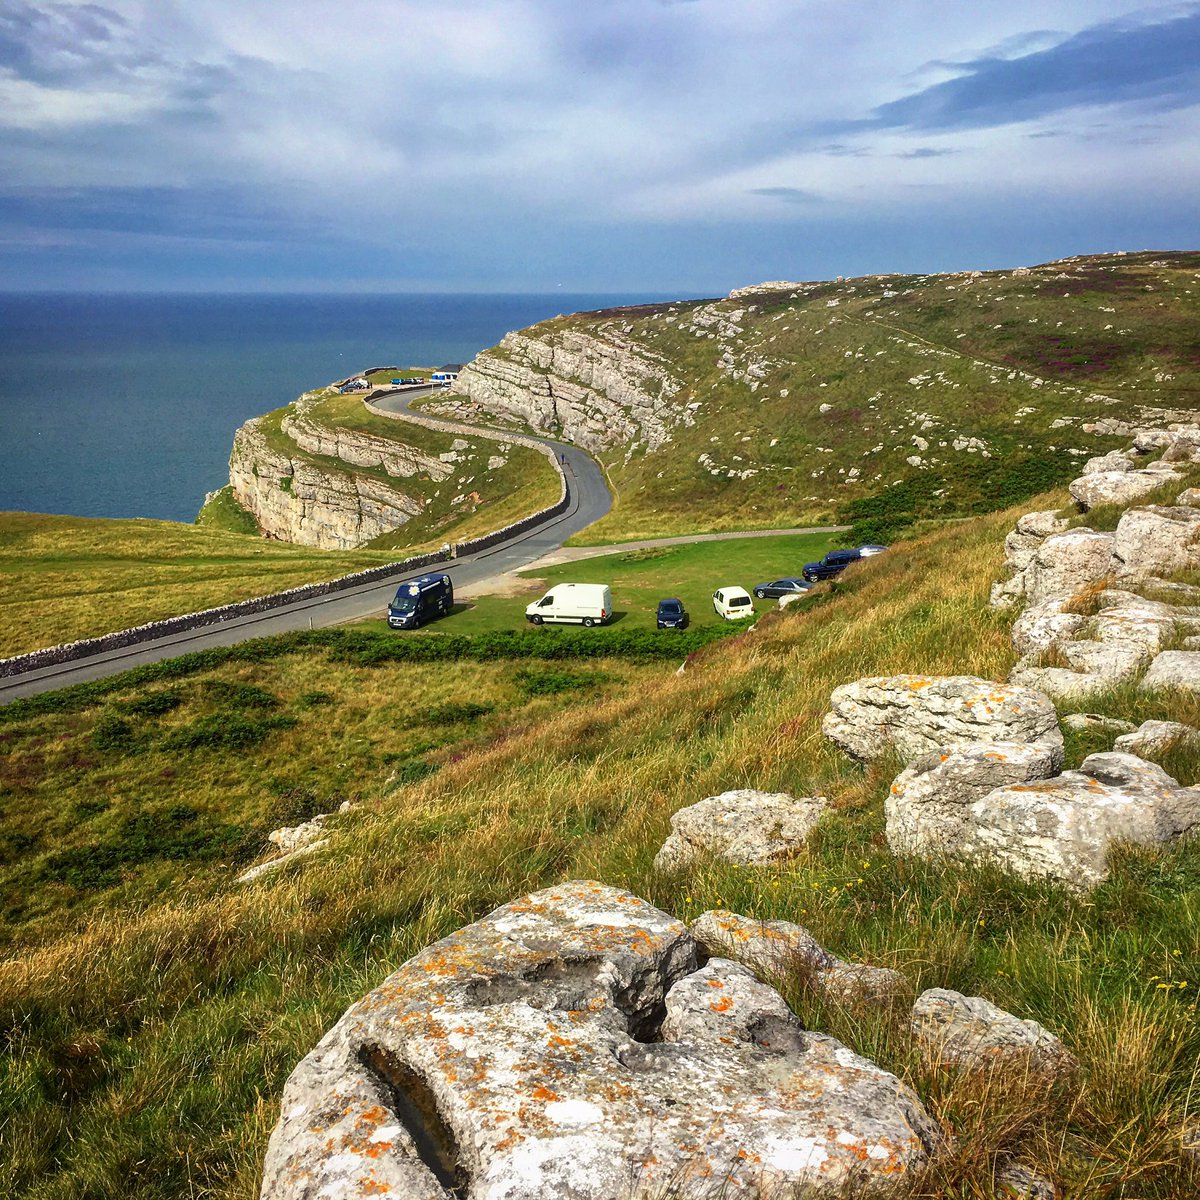 on.fb.me/20eLQr3 #driving #scenicdrive #scenicdrives #greatorme #northwales #northwalestagram #headland #ribster13 #tourismphotography #media #rugged #roads #worldwide #instatravel #instatravelgram #landscapephotography #landscape #landscapeimages #llandudno